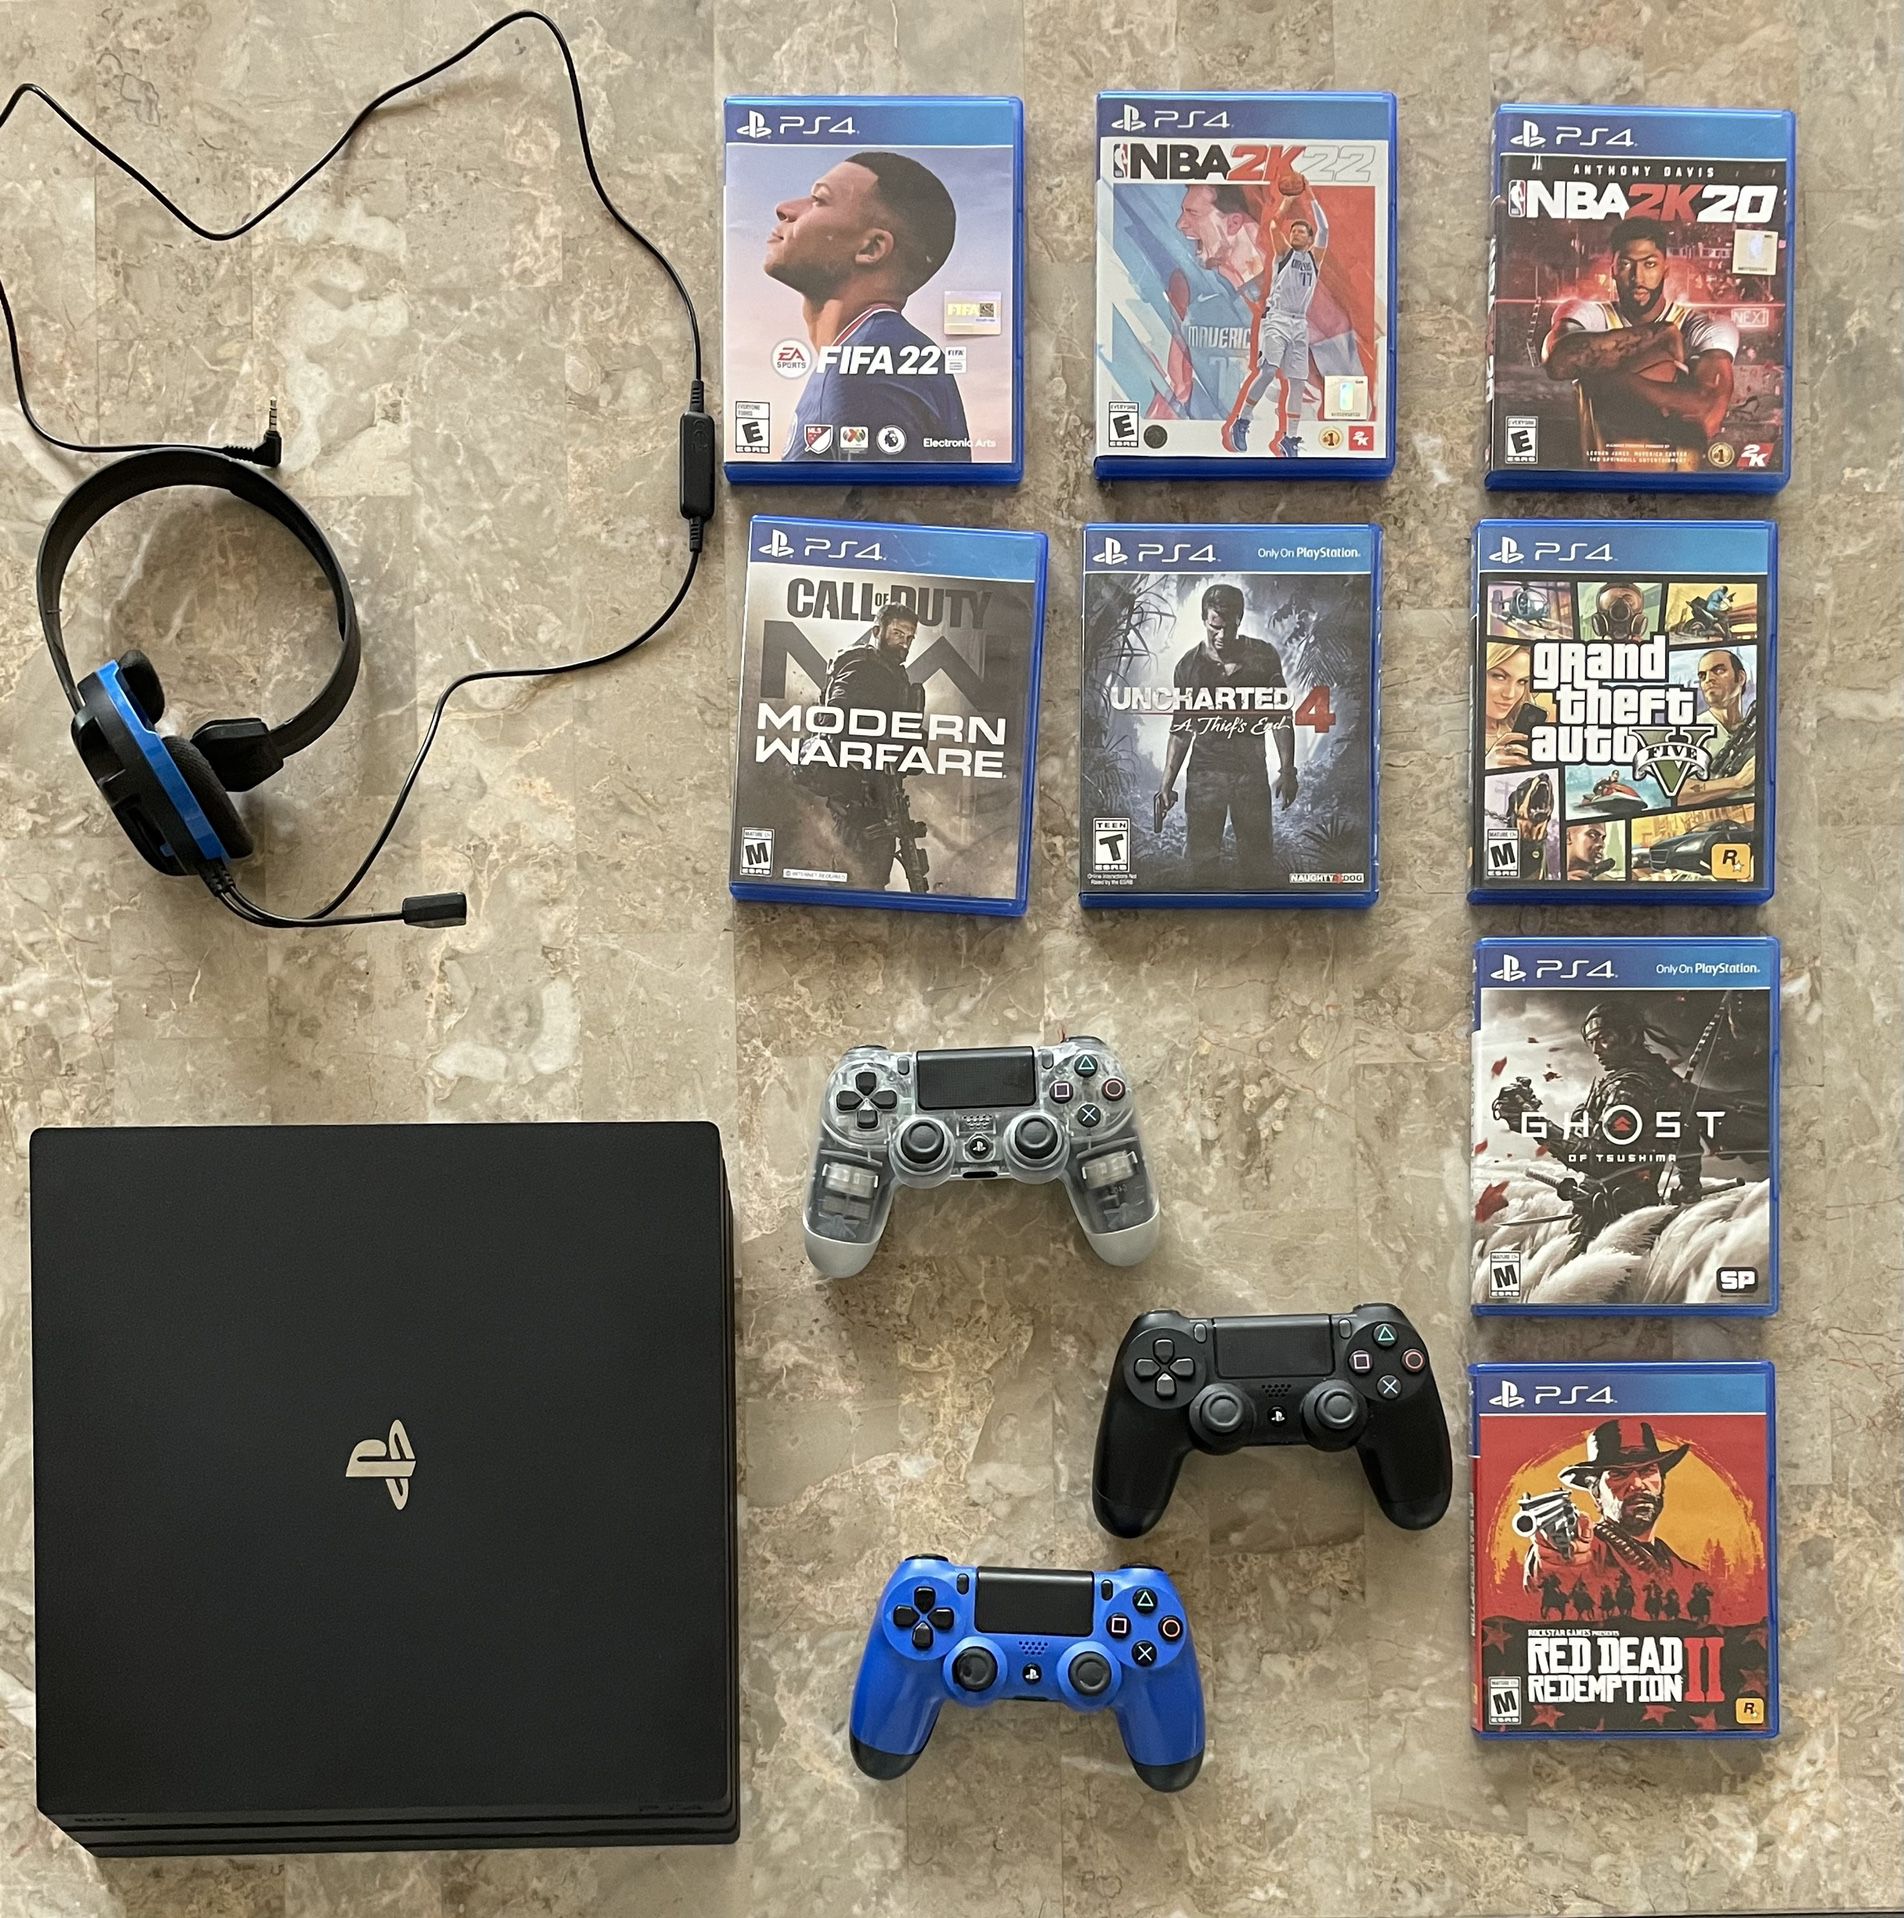 PlayStation 4 First Generation Or Pro With 3 Controllers, Turtle Beach Headset And Games 